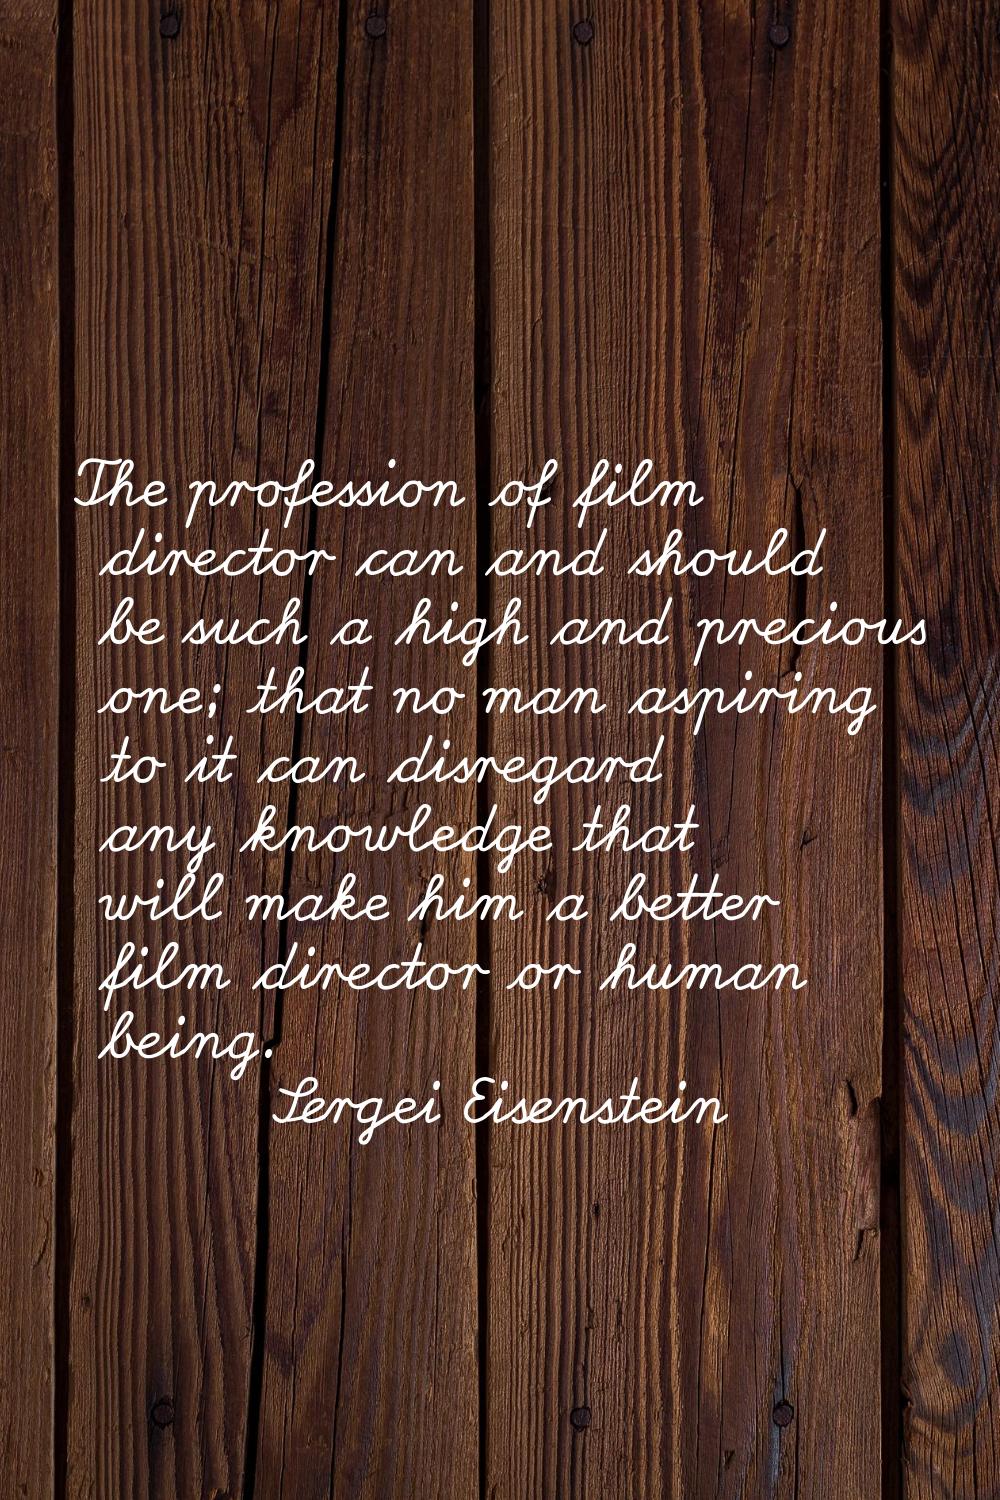 The profession of film director can and should be such a high and precious one; that no man aspirin